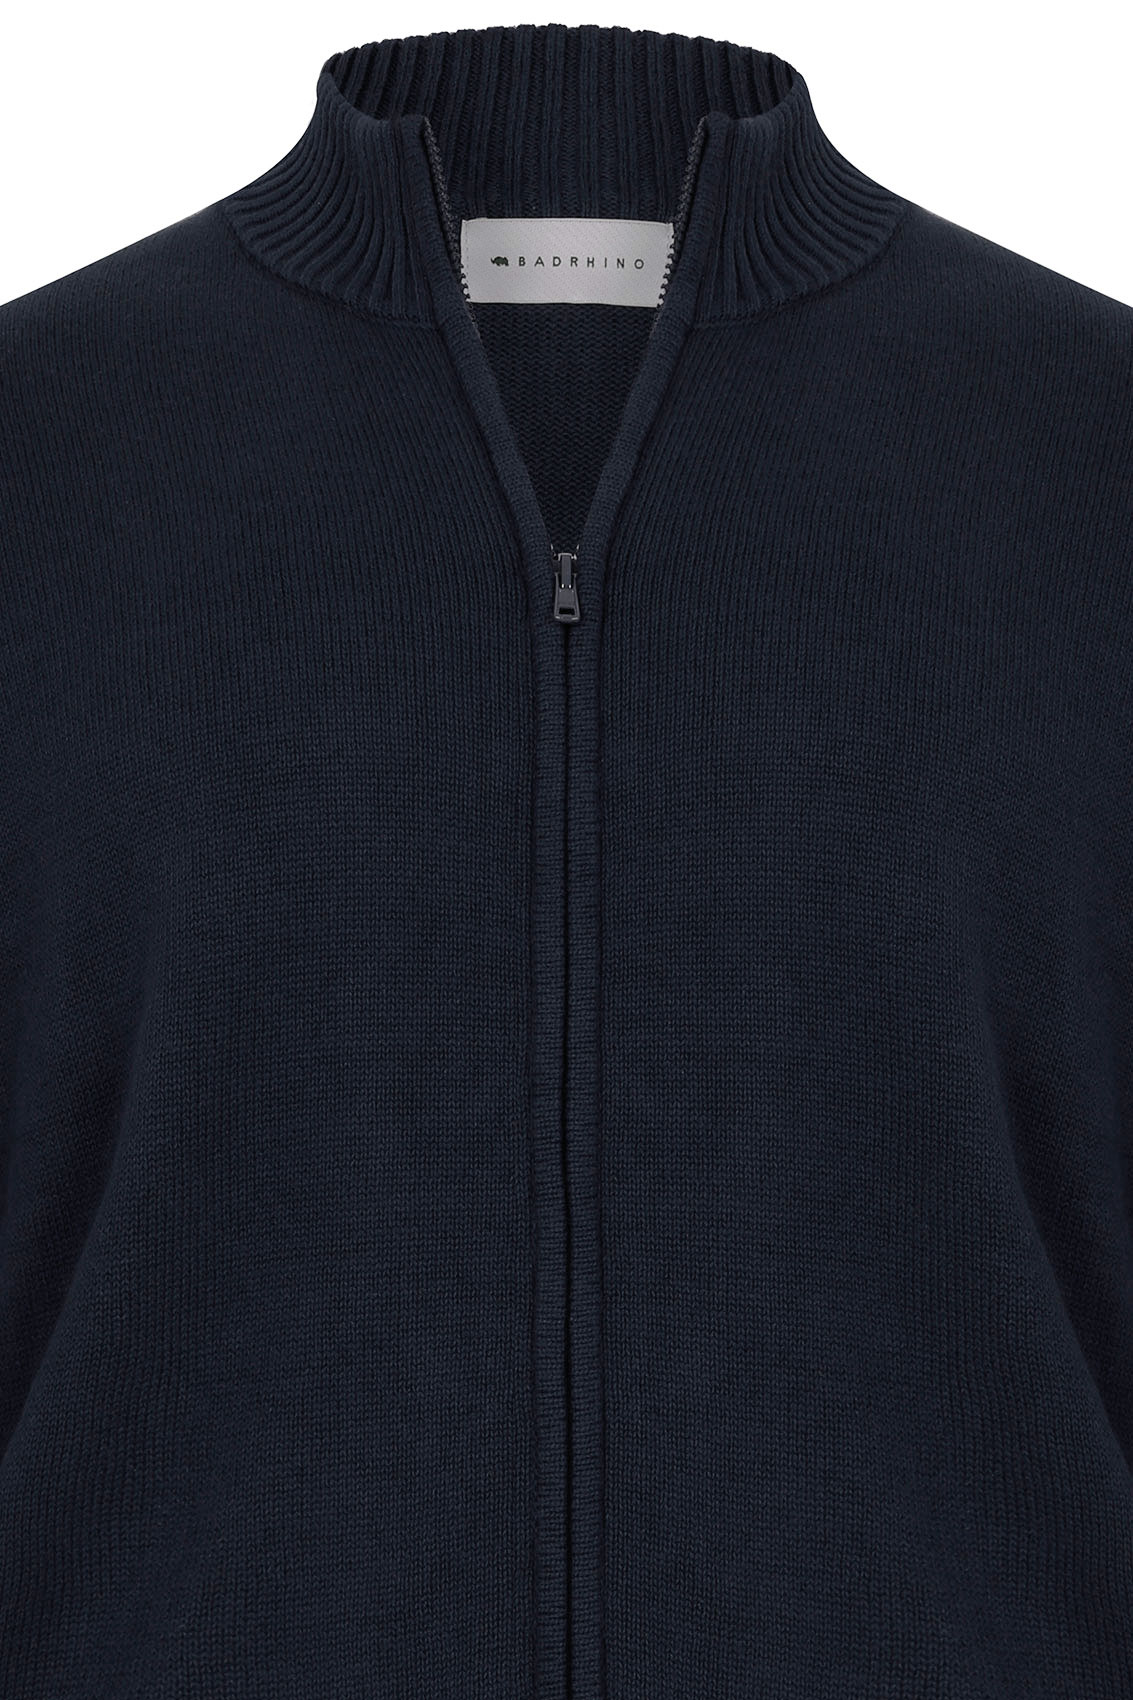 BadRhino Navy Knitted Zip Sweater With Funnel Neck Extra large size L ...